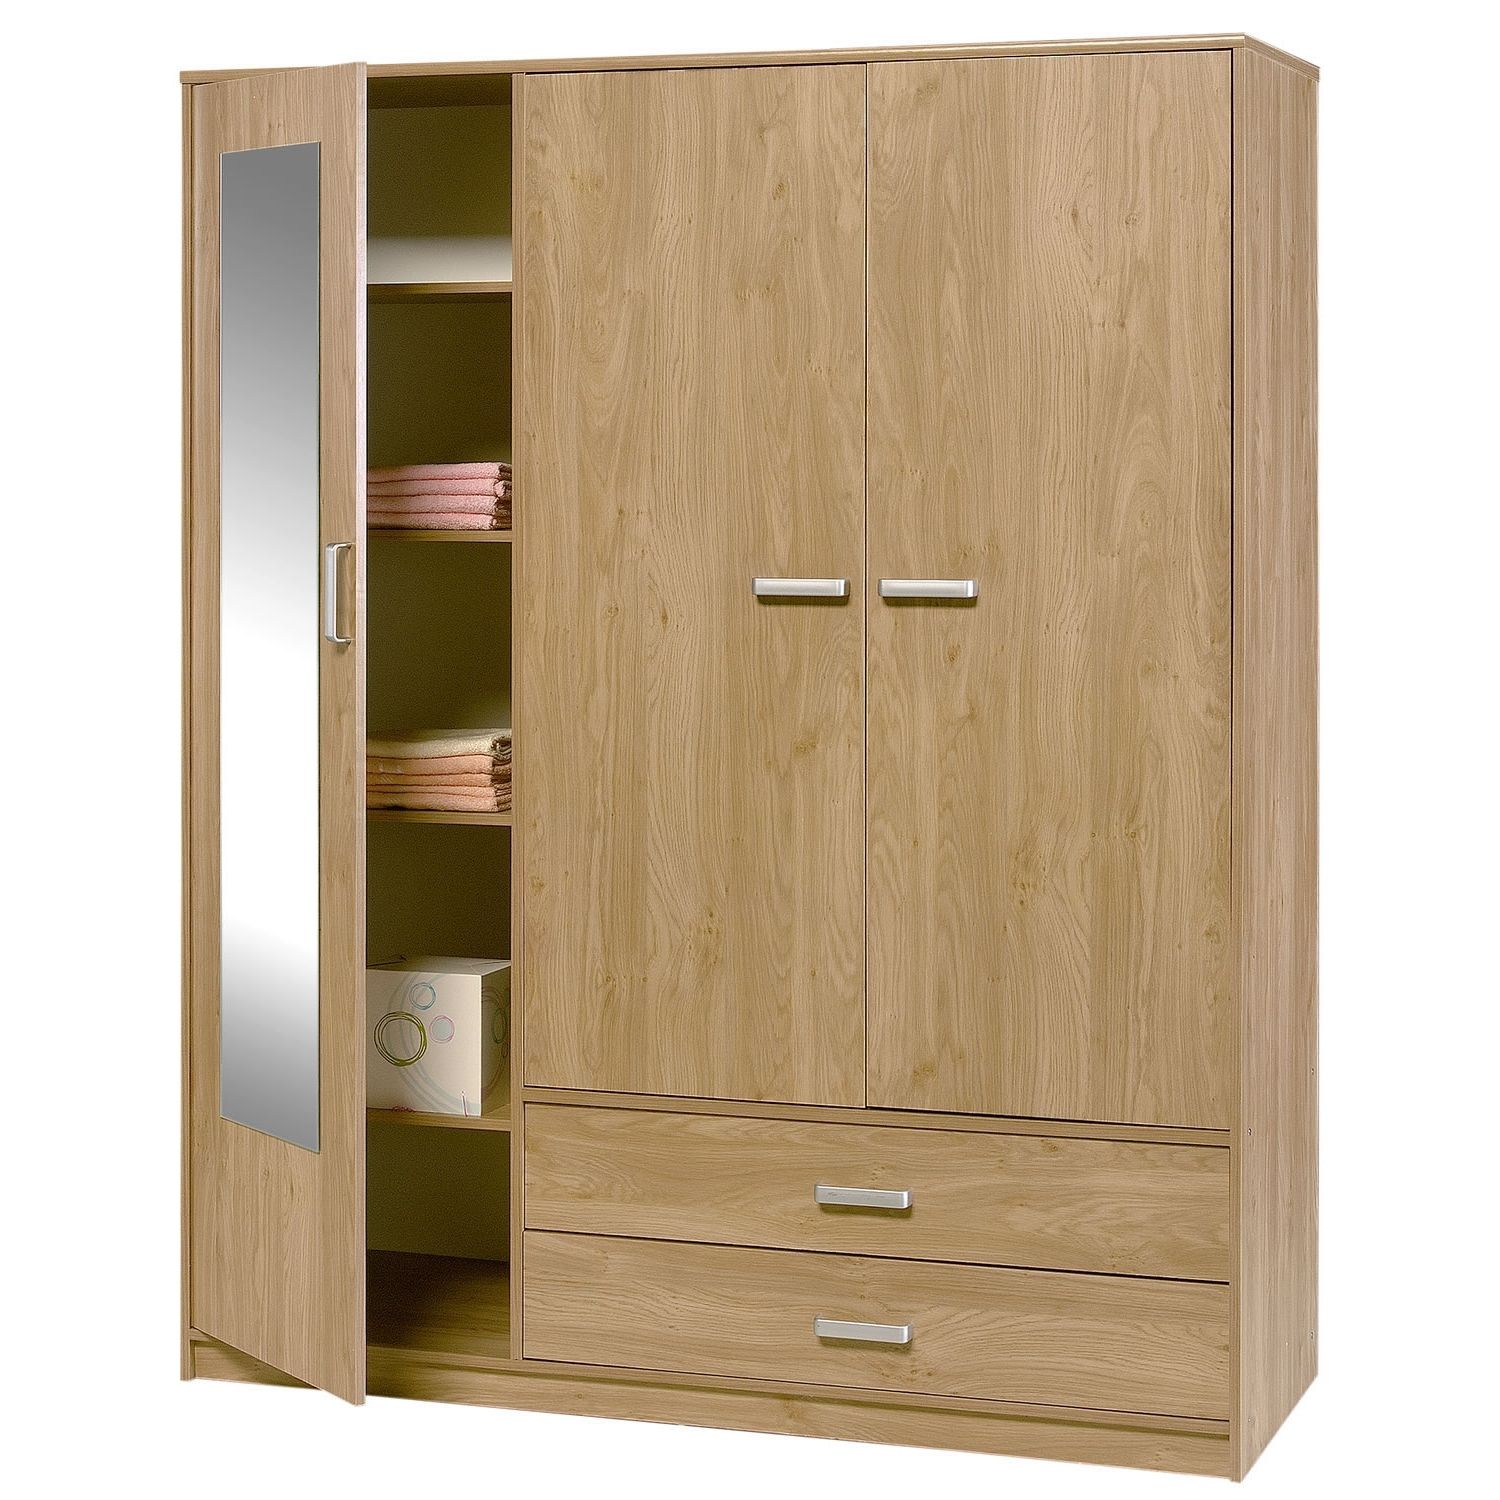 Door With Pertaining To Most Popular Wardrobes With Mirror And Drawers (View 2 of 15)